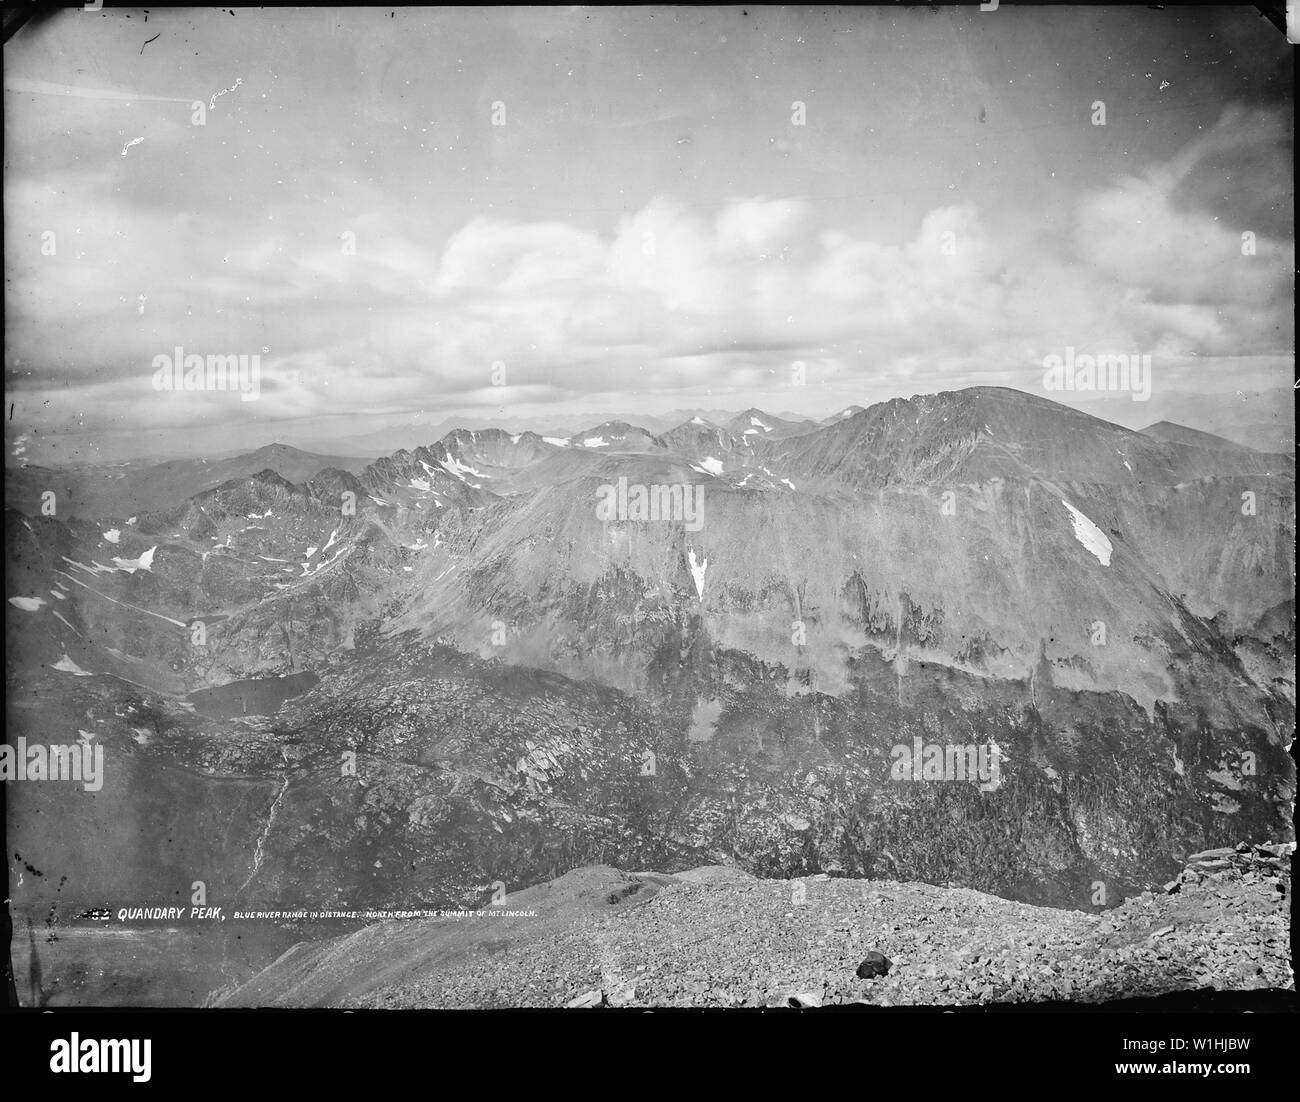 Panorama from summit of Mount Lincoln, shows Quandary Peak and Blue River Range. Stock Photo